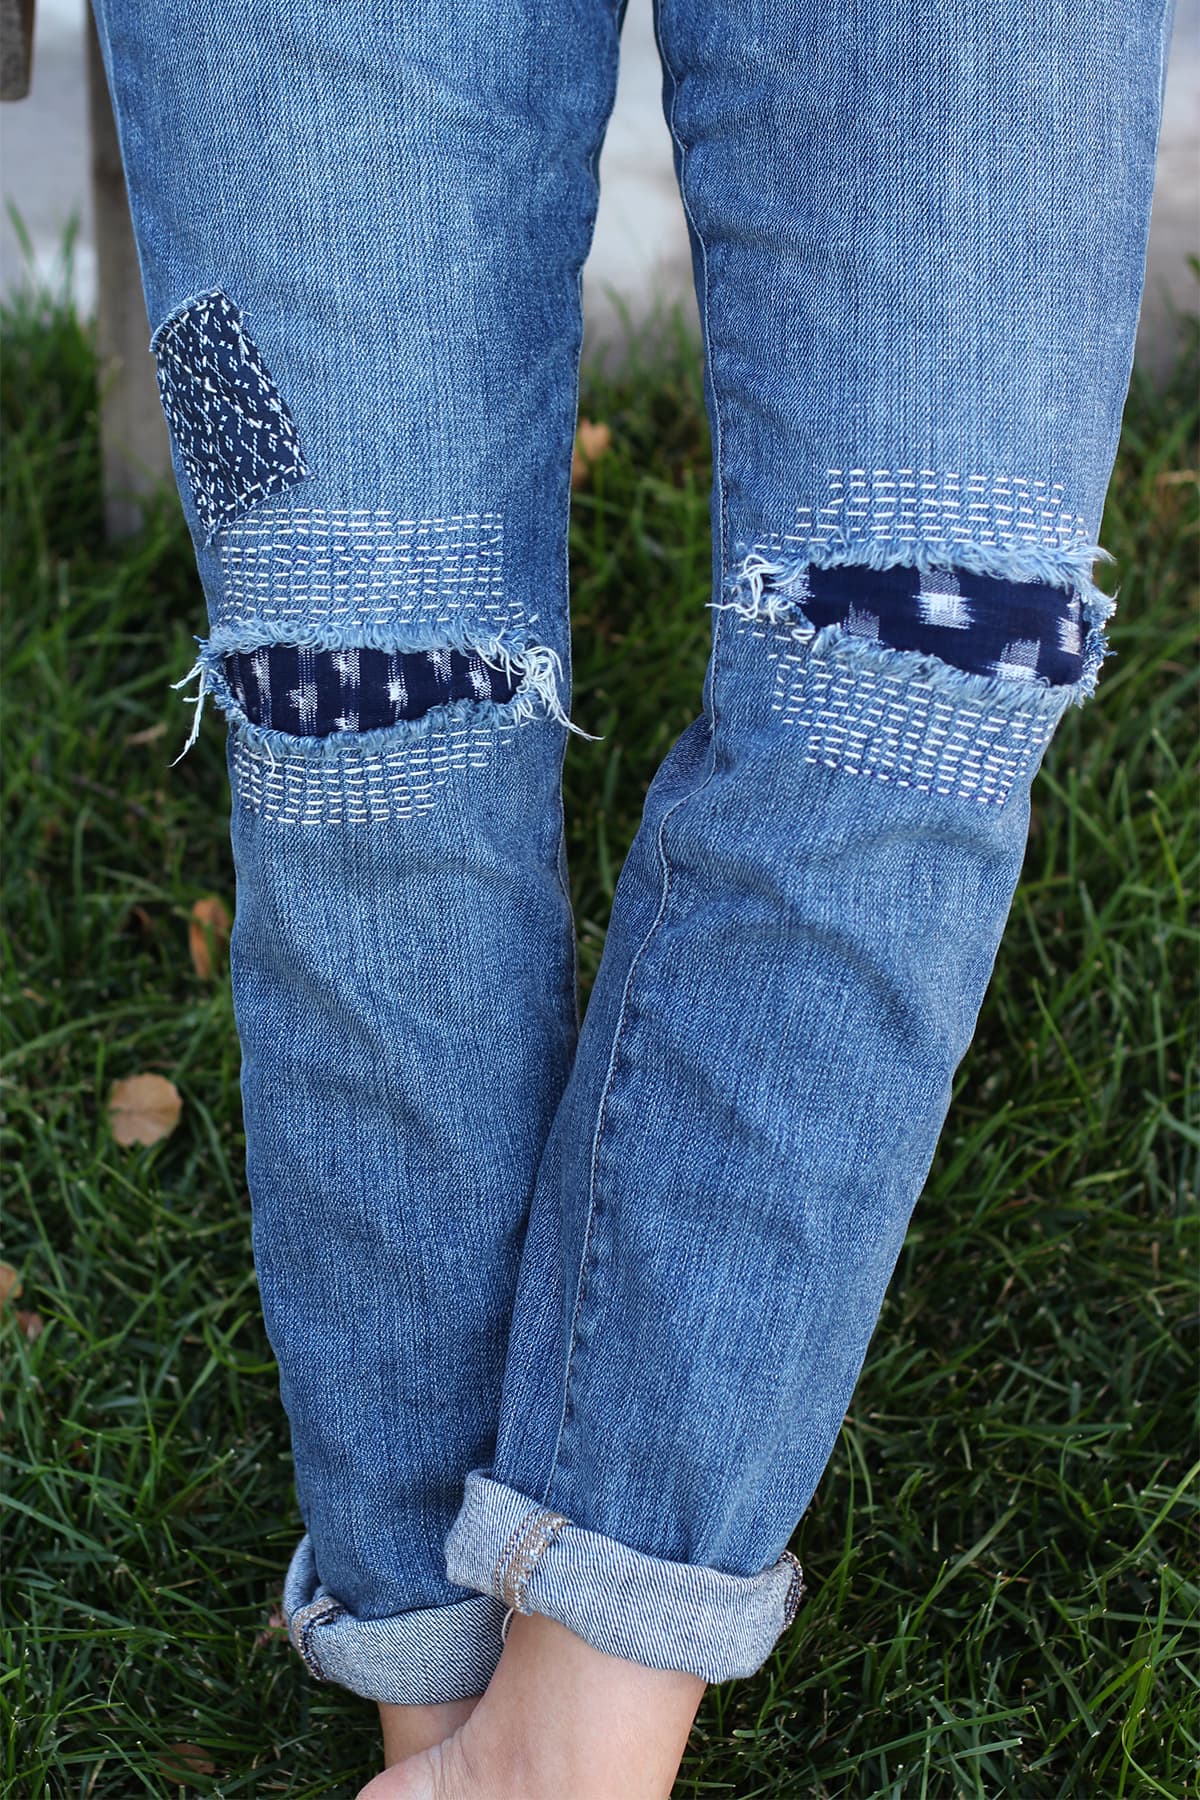 How to wear ripped jeans: a grown up's guide